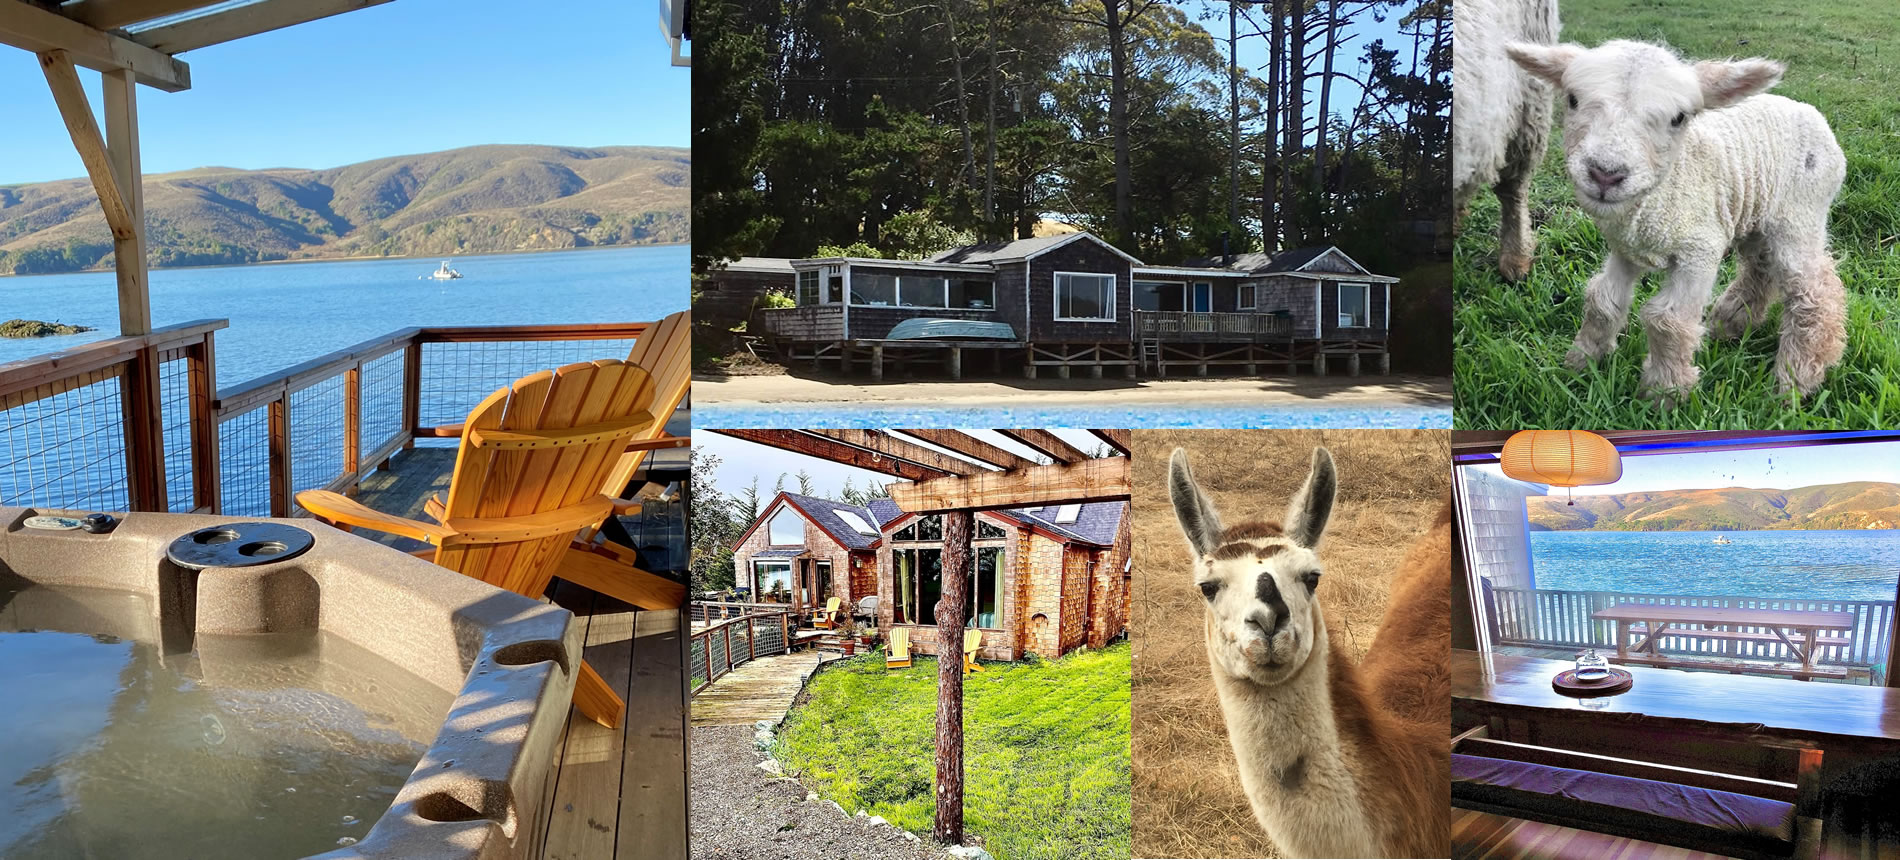 high tide cottages & farm tomales bay collage